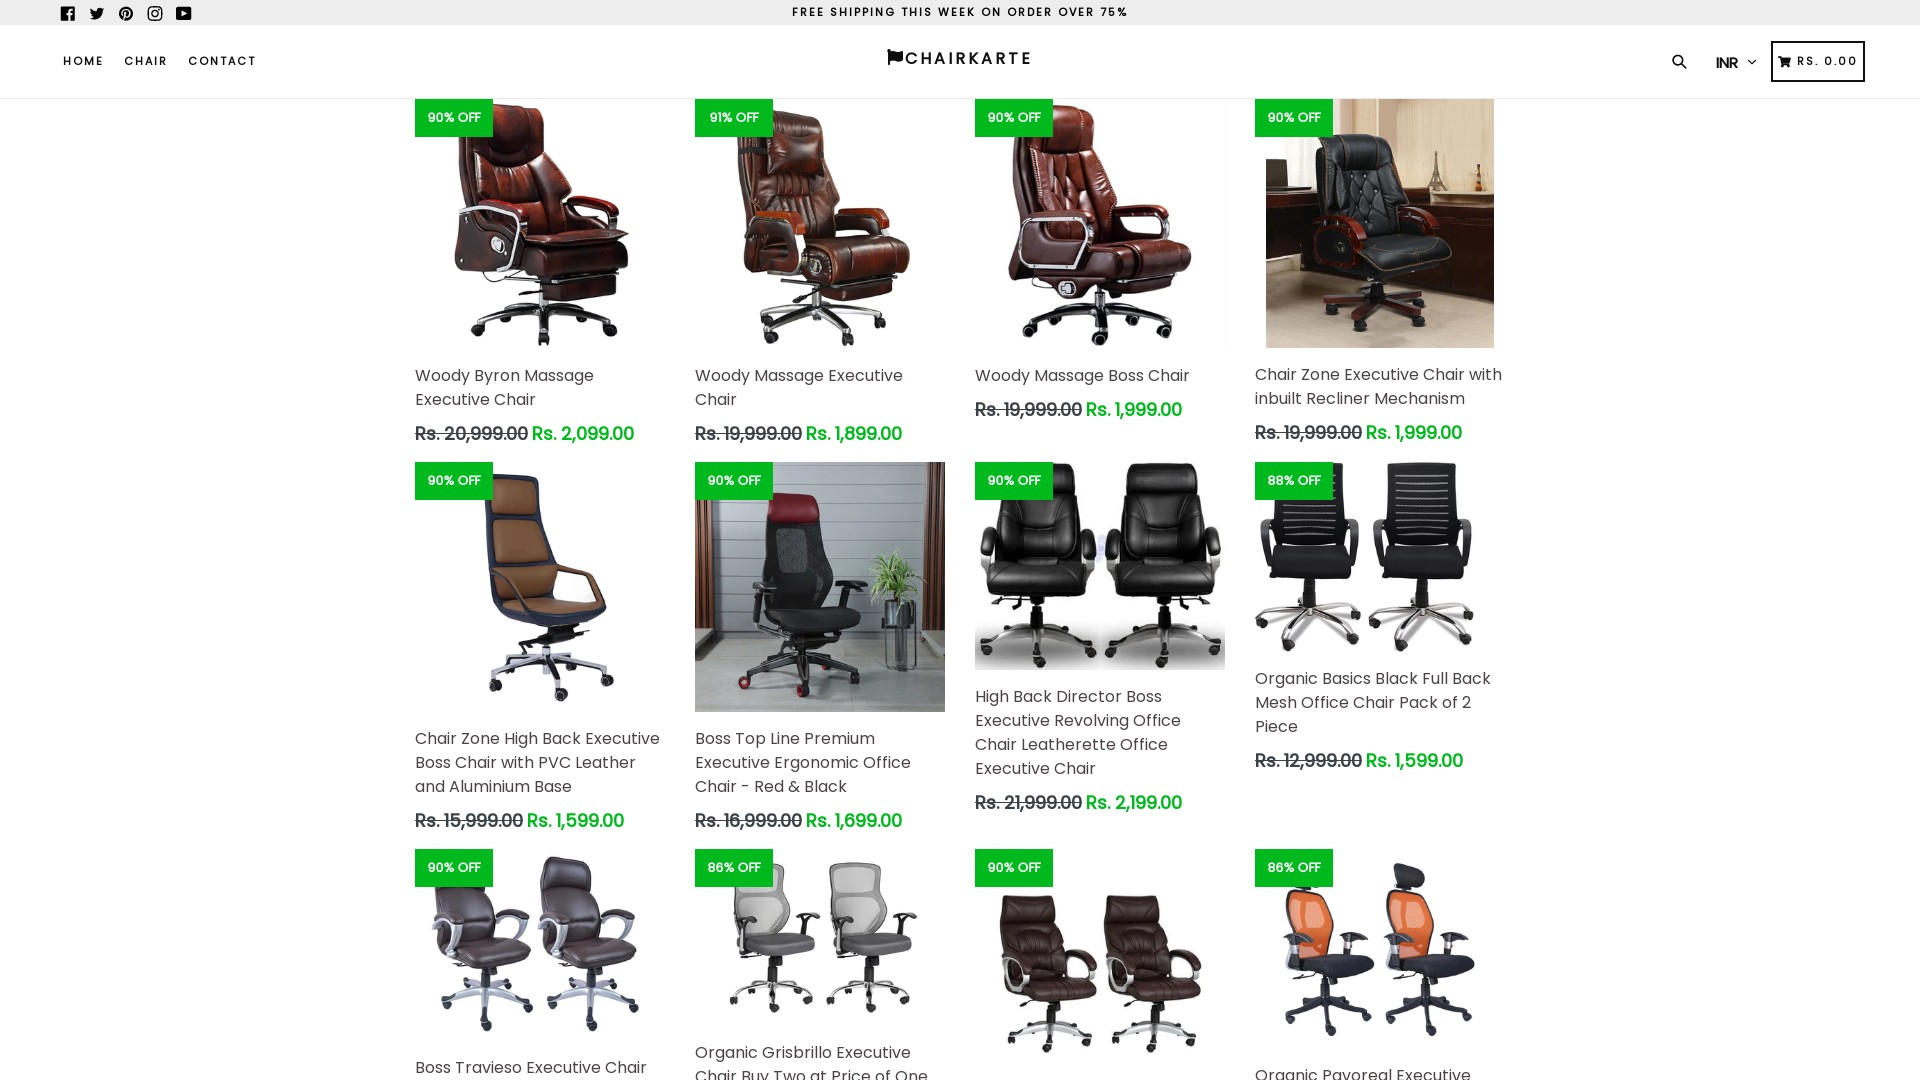 Chairkarte at chairkarte.myshopify.com